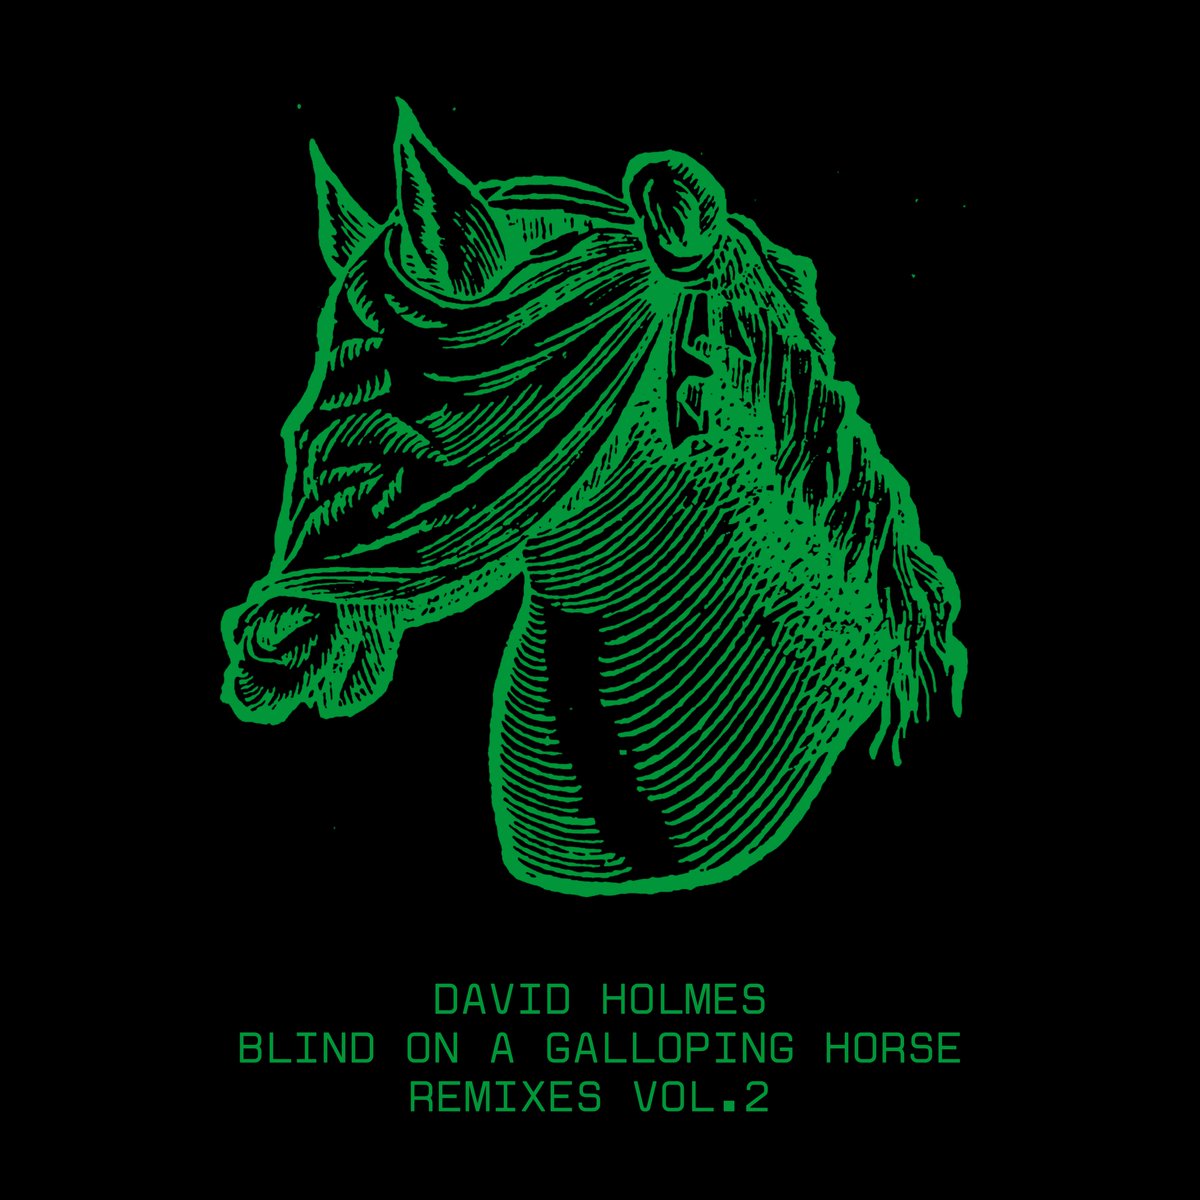 'Blind On A Galloping Horse' feat Raven Violet, Remixes vol. 2 is available to stream and download today! ✊📷 linktr.ee/davidholmes1969 @jordannocturne Skymas @HardwayBros @2020sonicboom @pandabear Colleen Cosmo Murphy @xpre552 Ammonite Remix